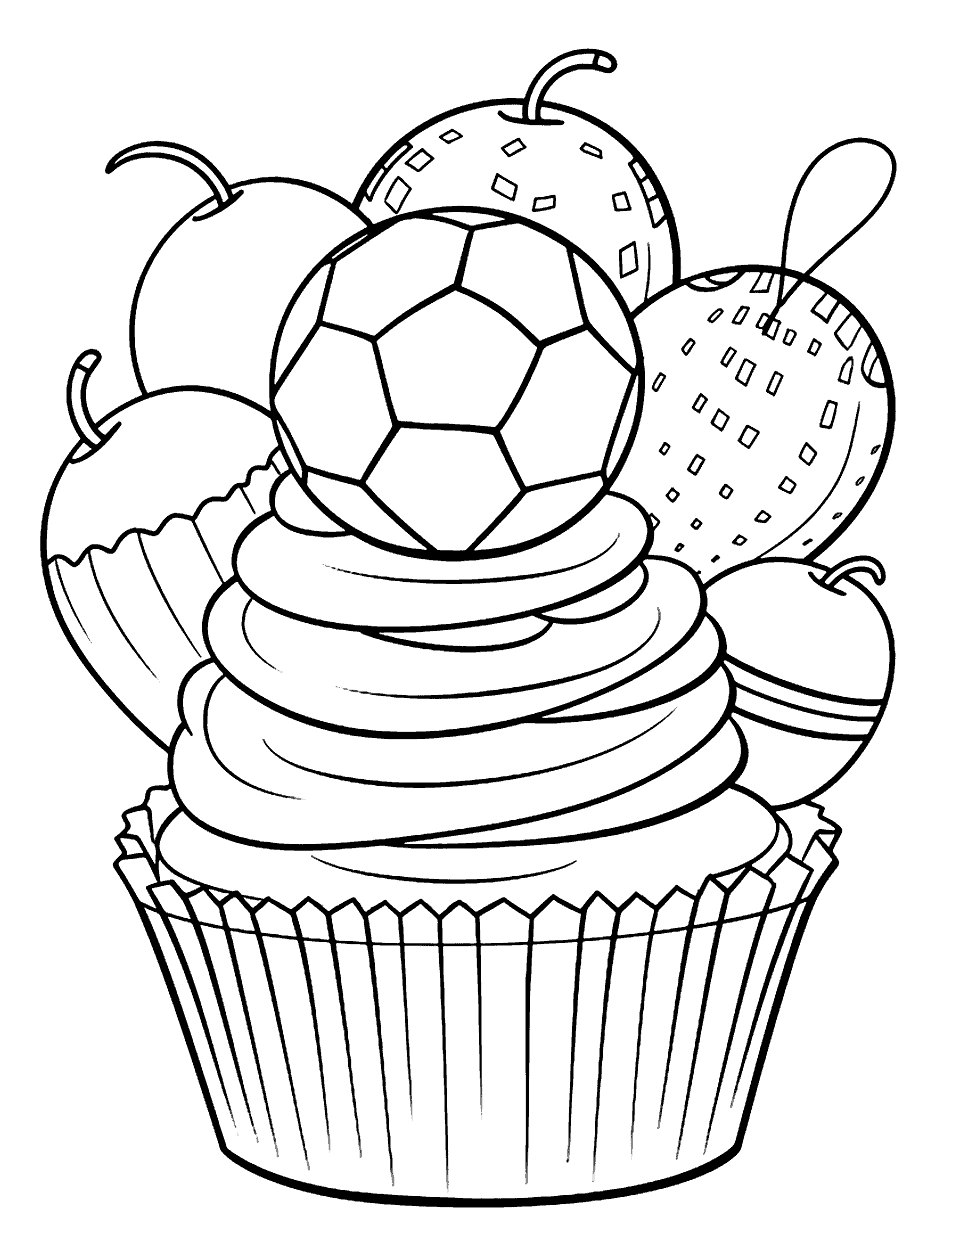 Sports-Themed Cupcake Coloring Page - A cupcake decorated with a candy sport ball.